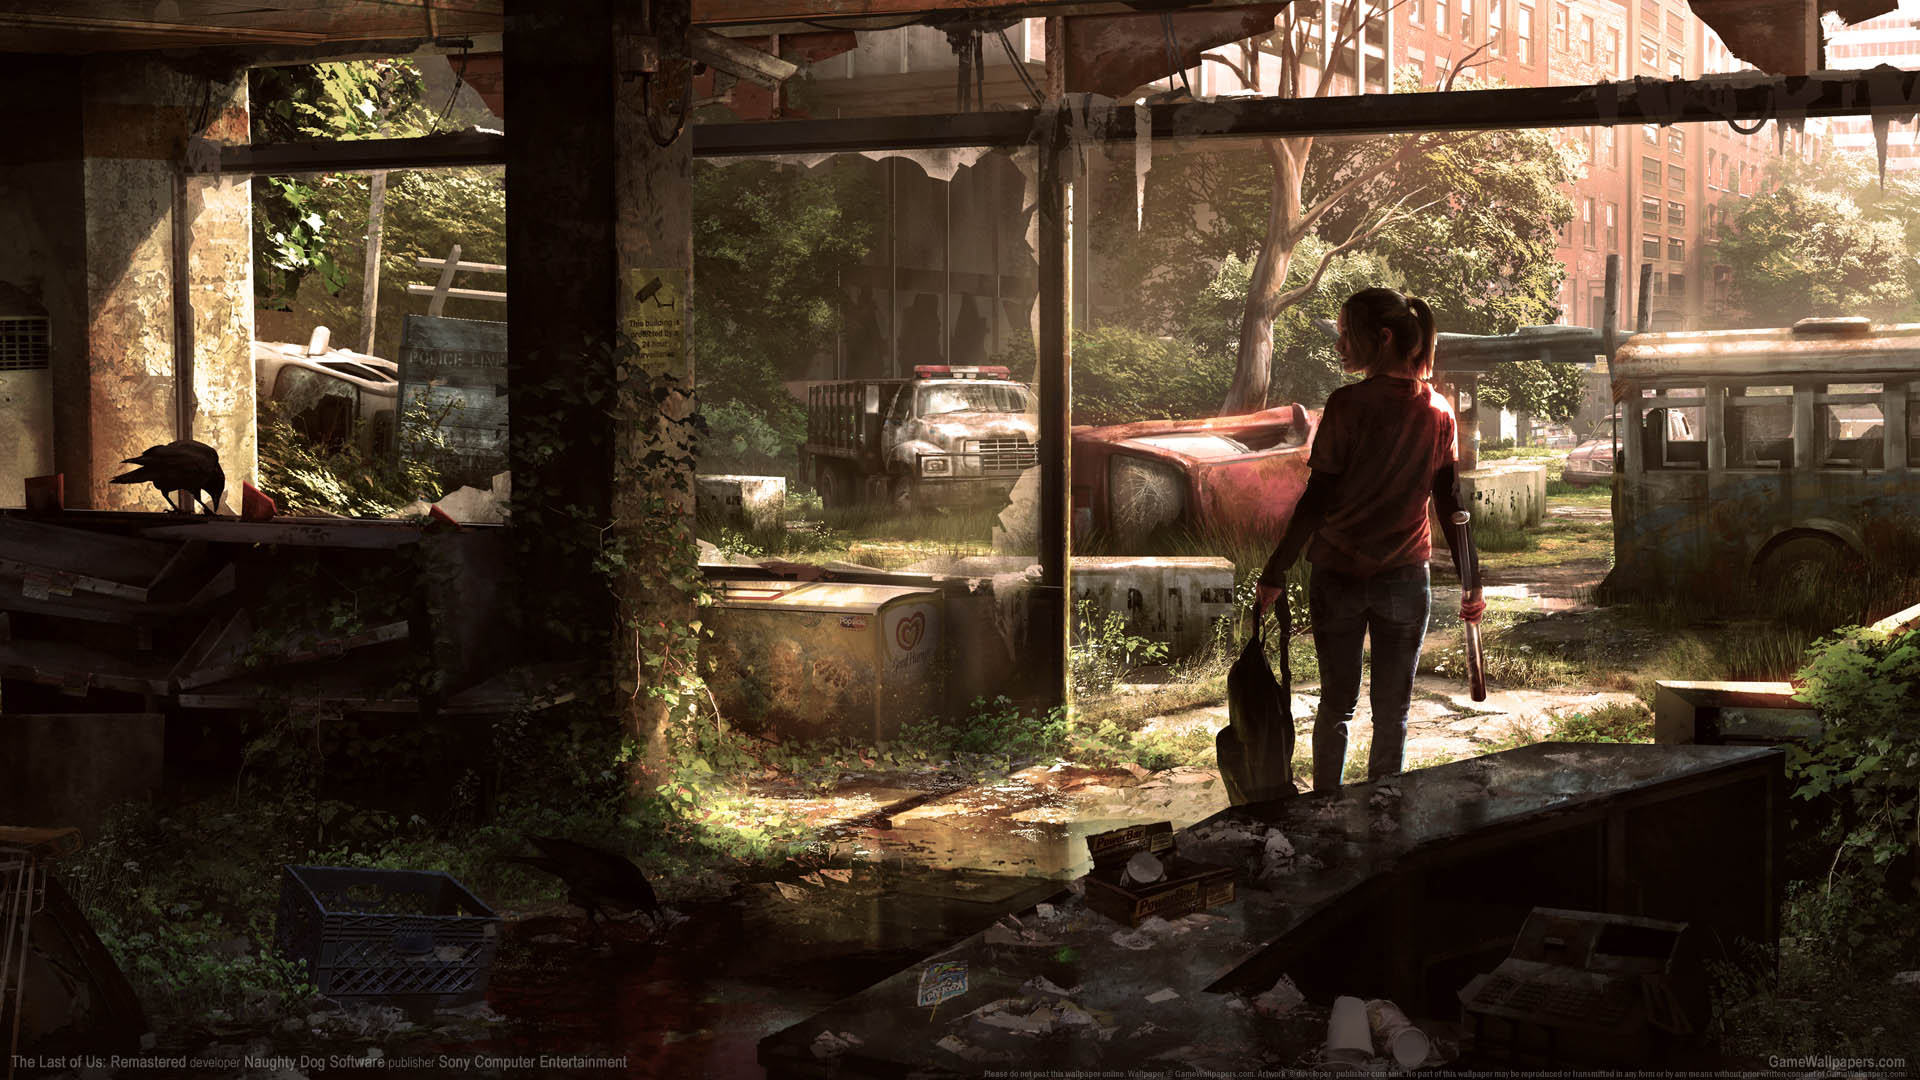 The Last of Us Wallpaper, The Last of Us (Remastered)